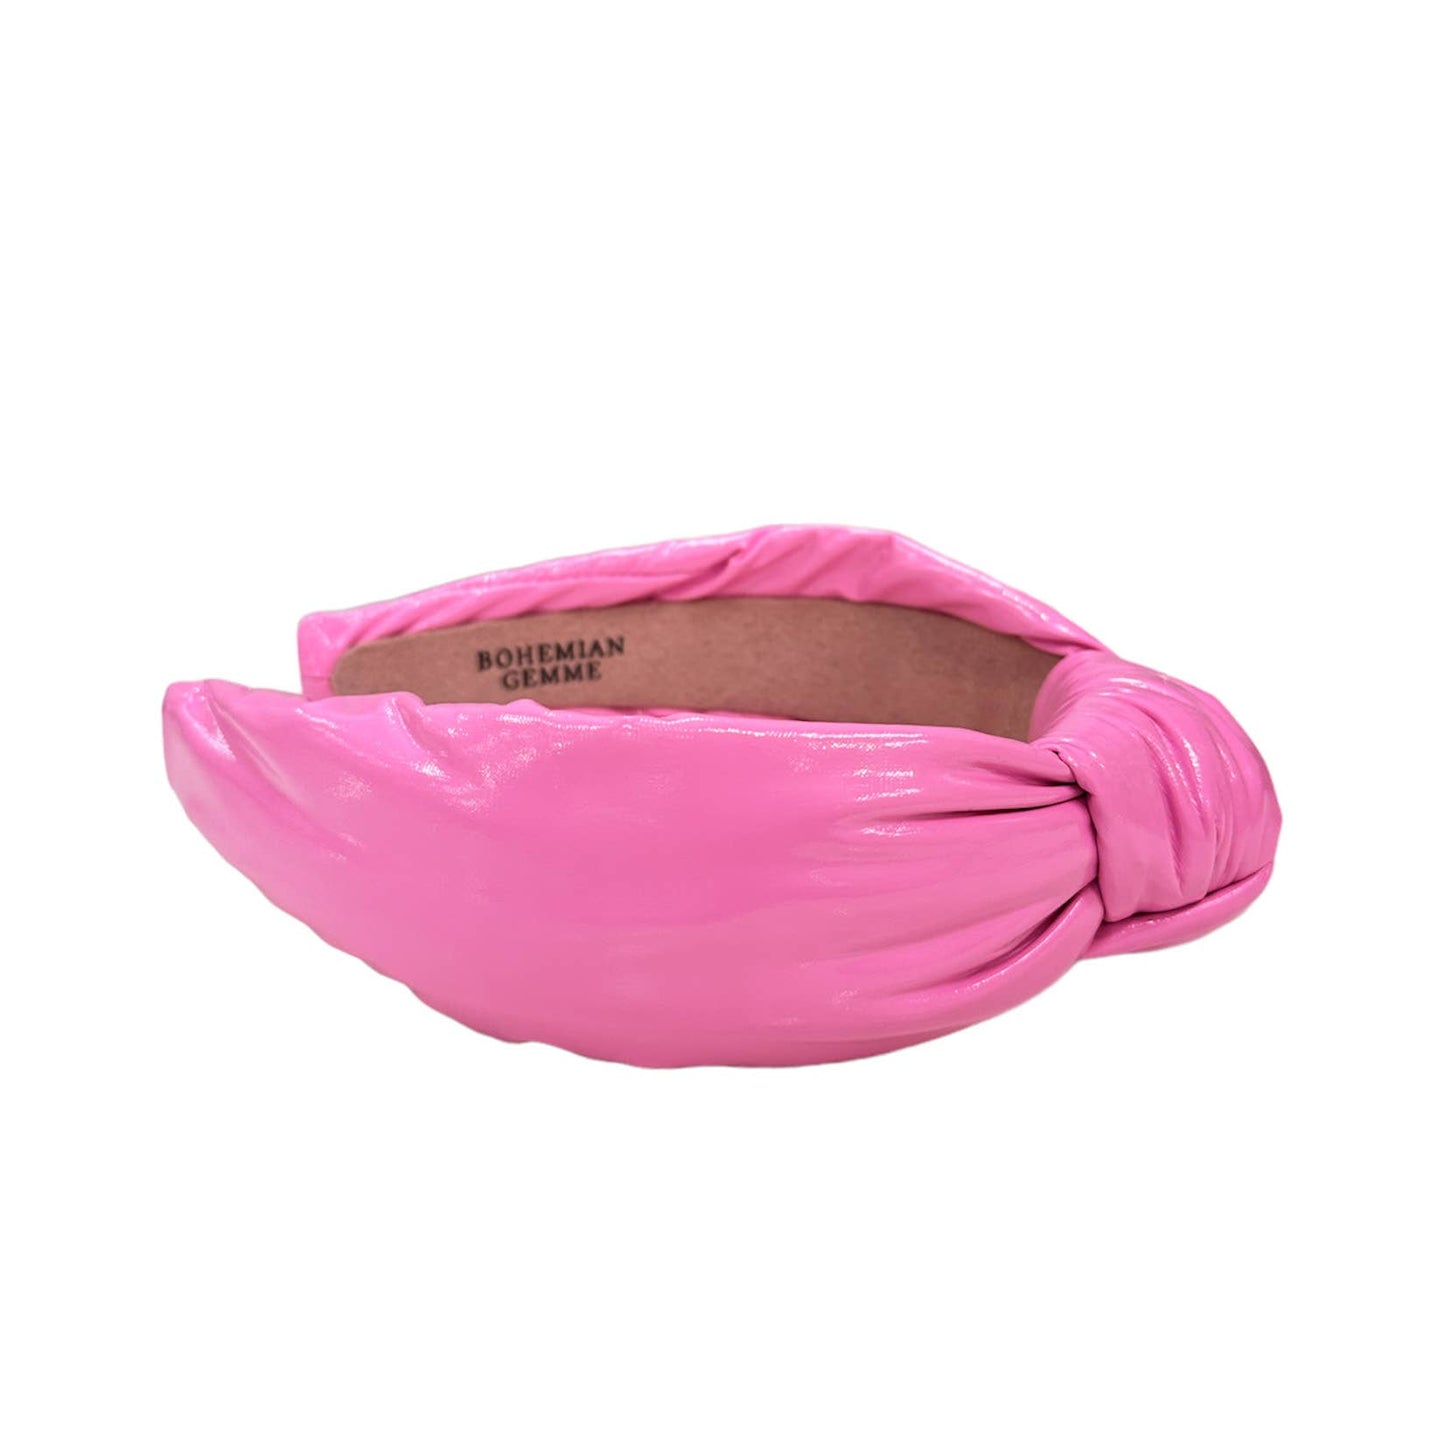 BOHEMIAN GEMME - Barbie Pink Patent Leather Knotted Headband